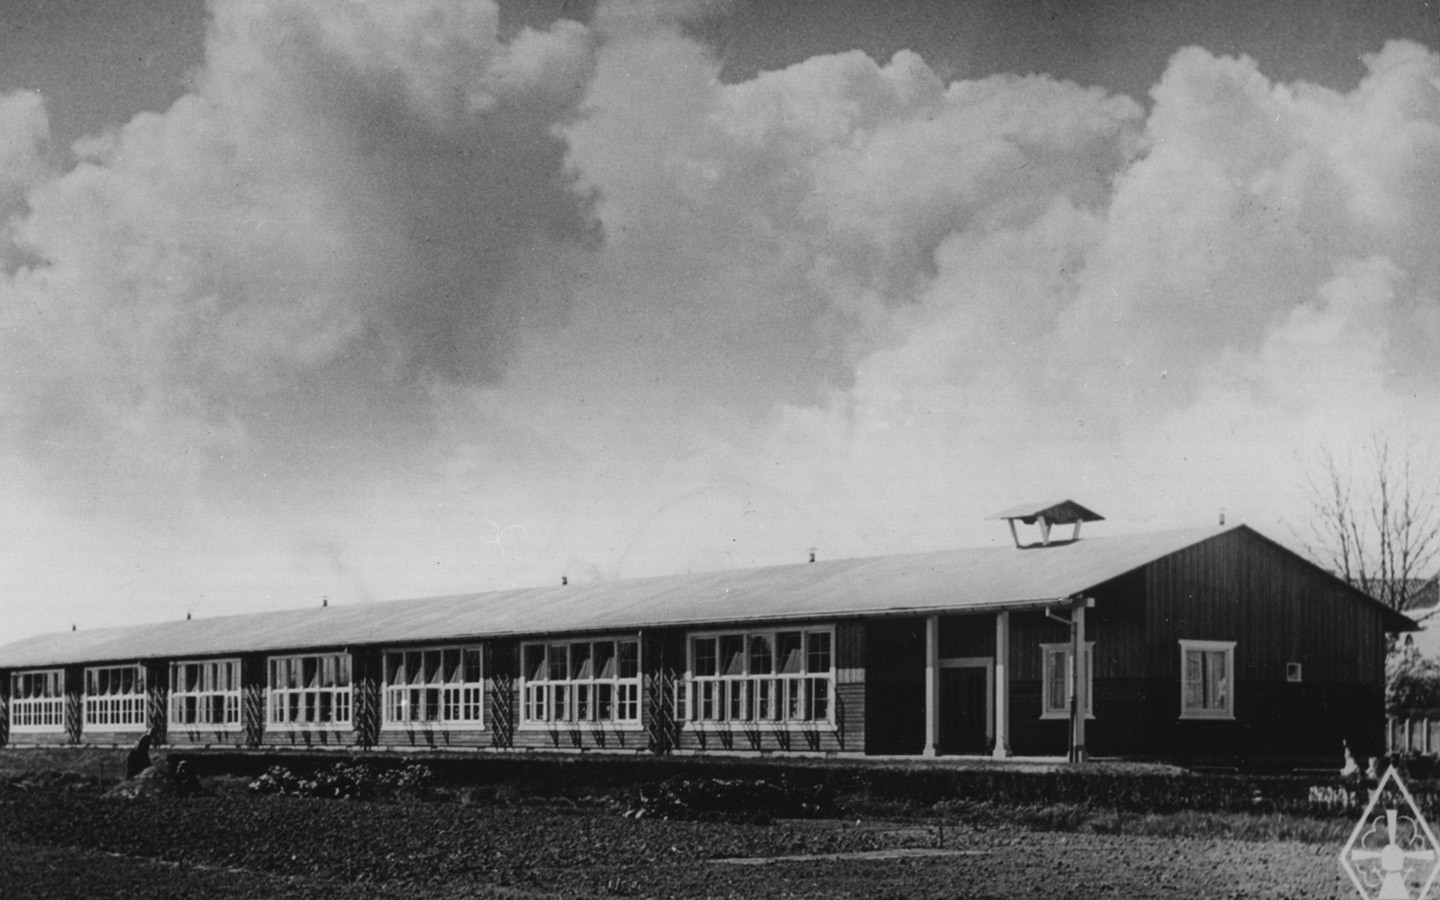 Black and white picture of a long one-storey school building with a pitched roof. Dark-painted wooden facades, white window frames. 